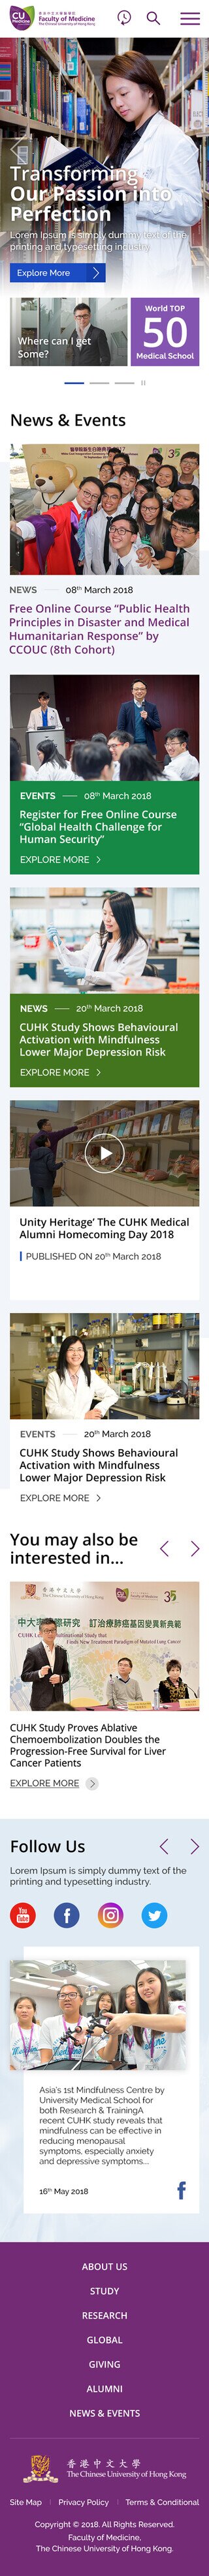 CUHK Faculty of Medicine Mobile Homepage